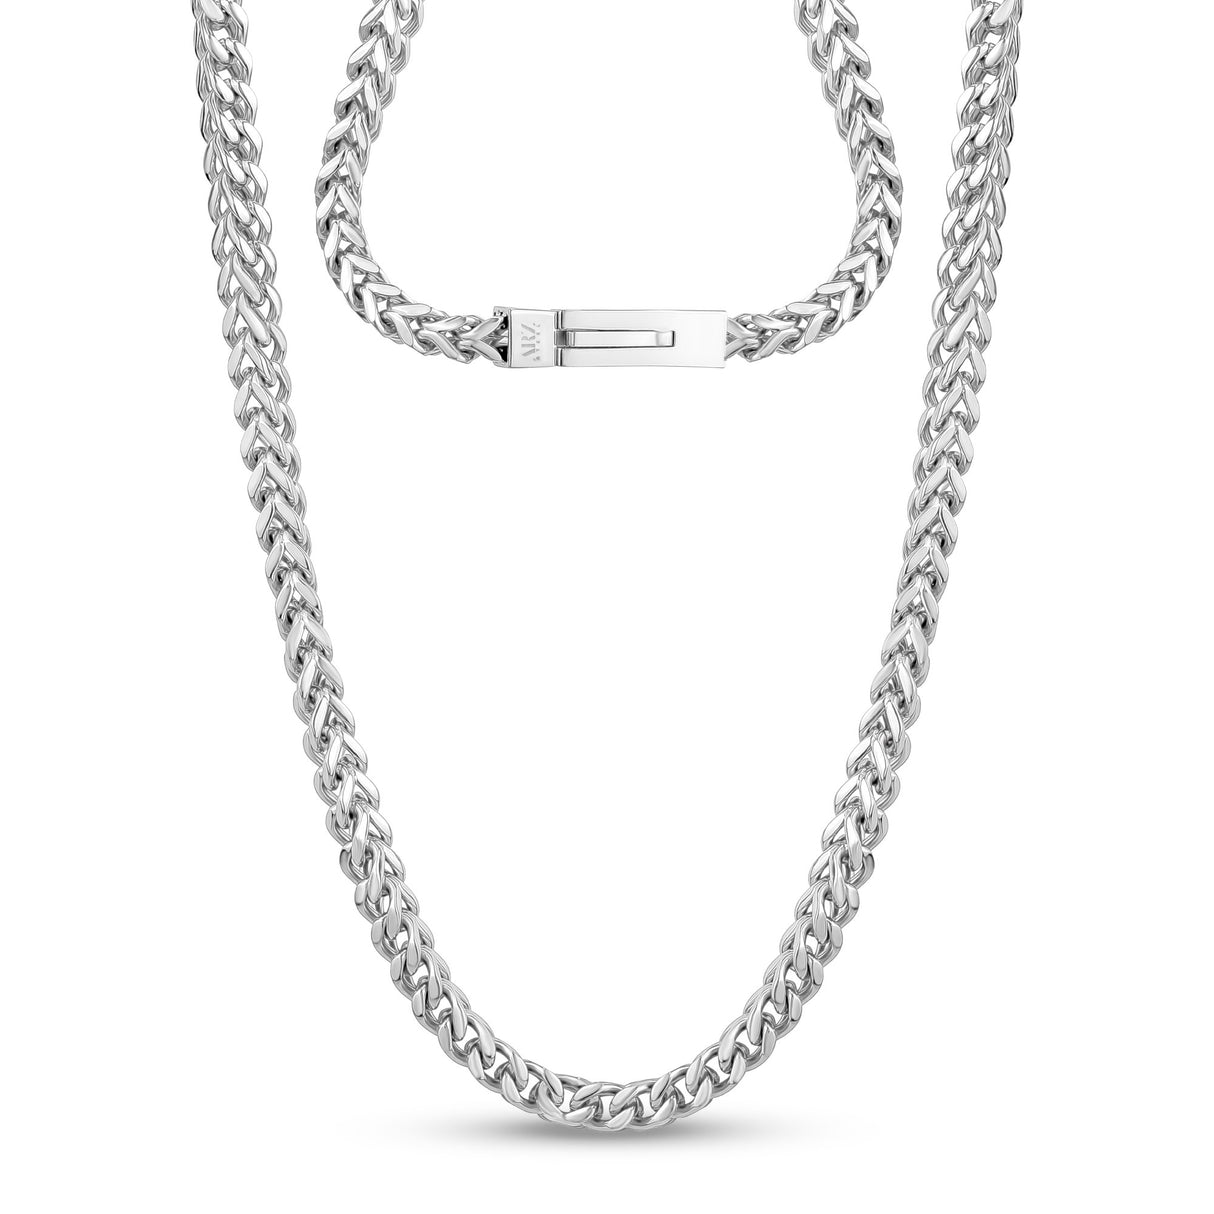 Men Necklace - 6mm Stainless Steel Franco Link Chain Necklace - Engravable